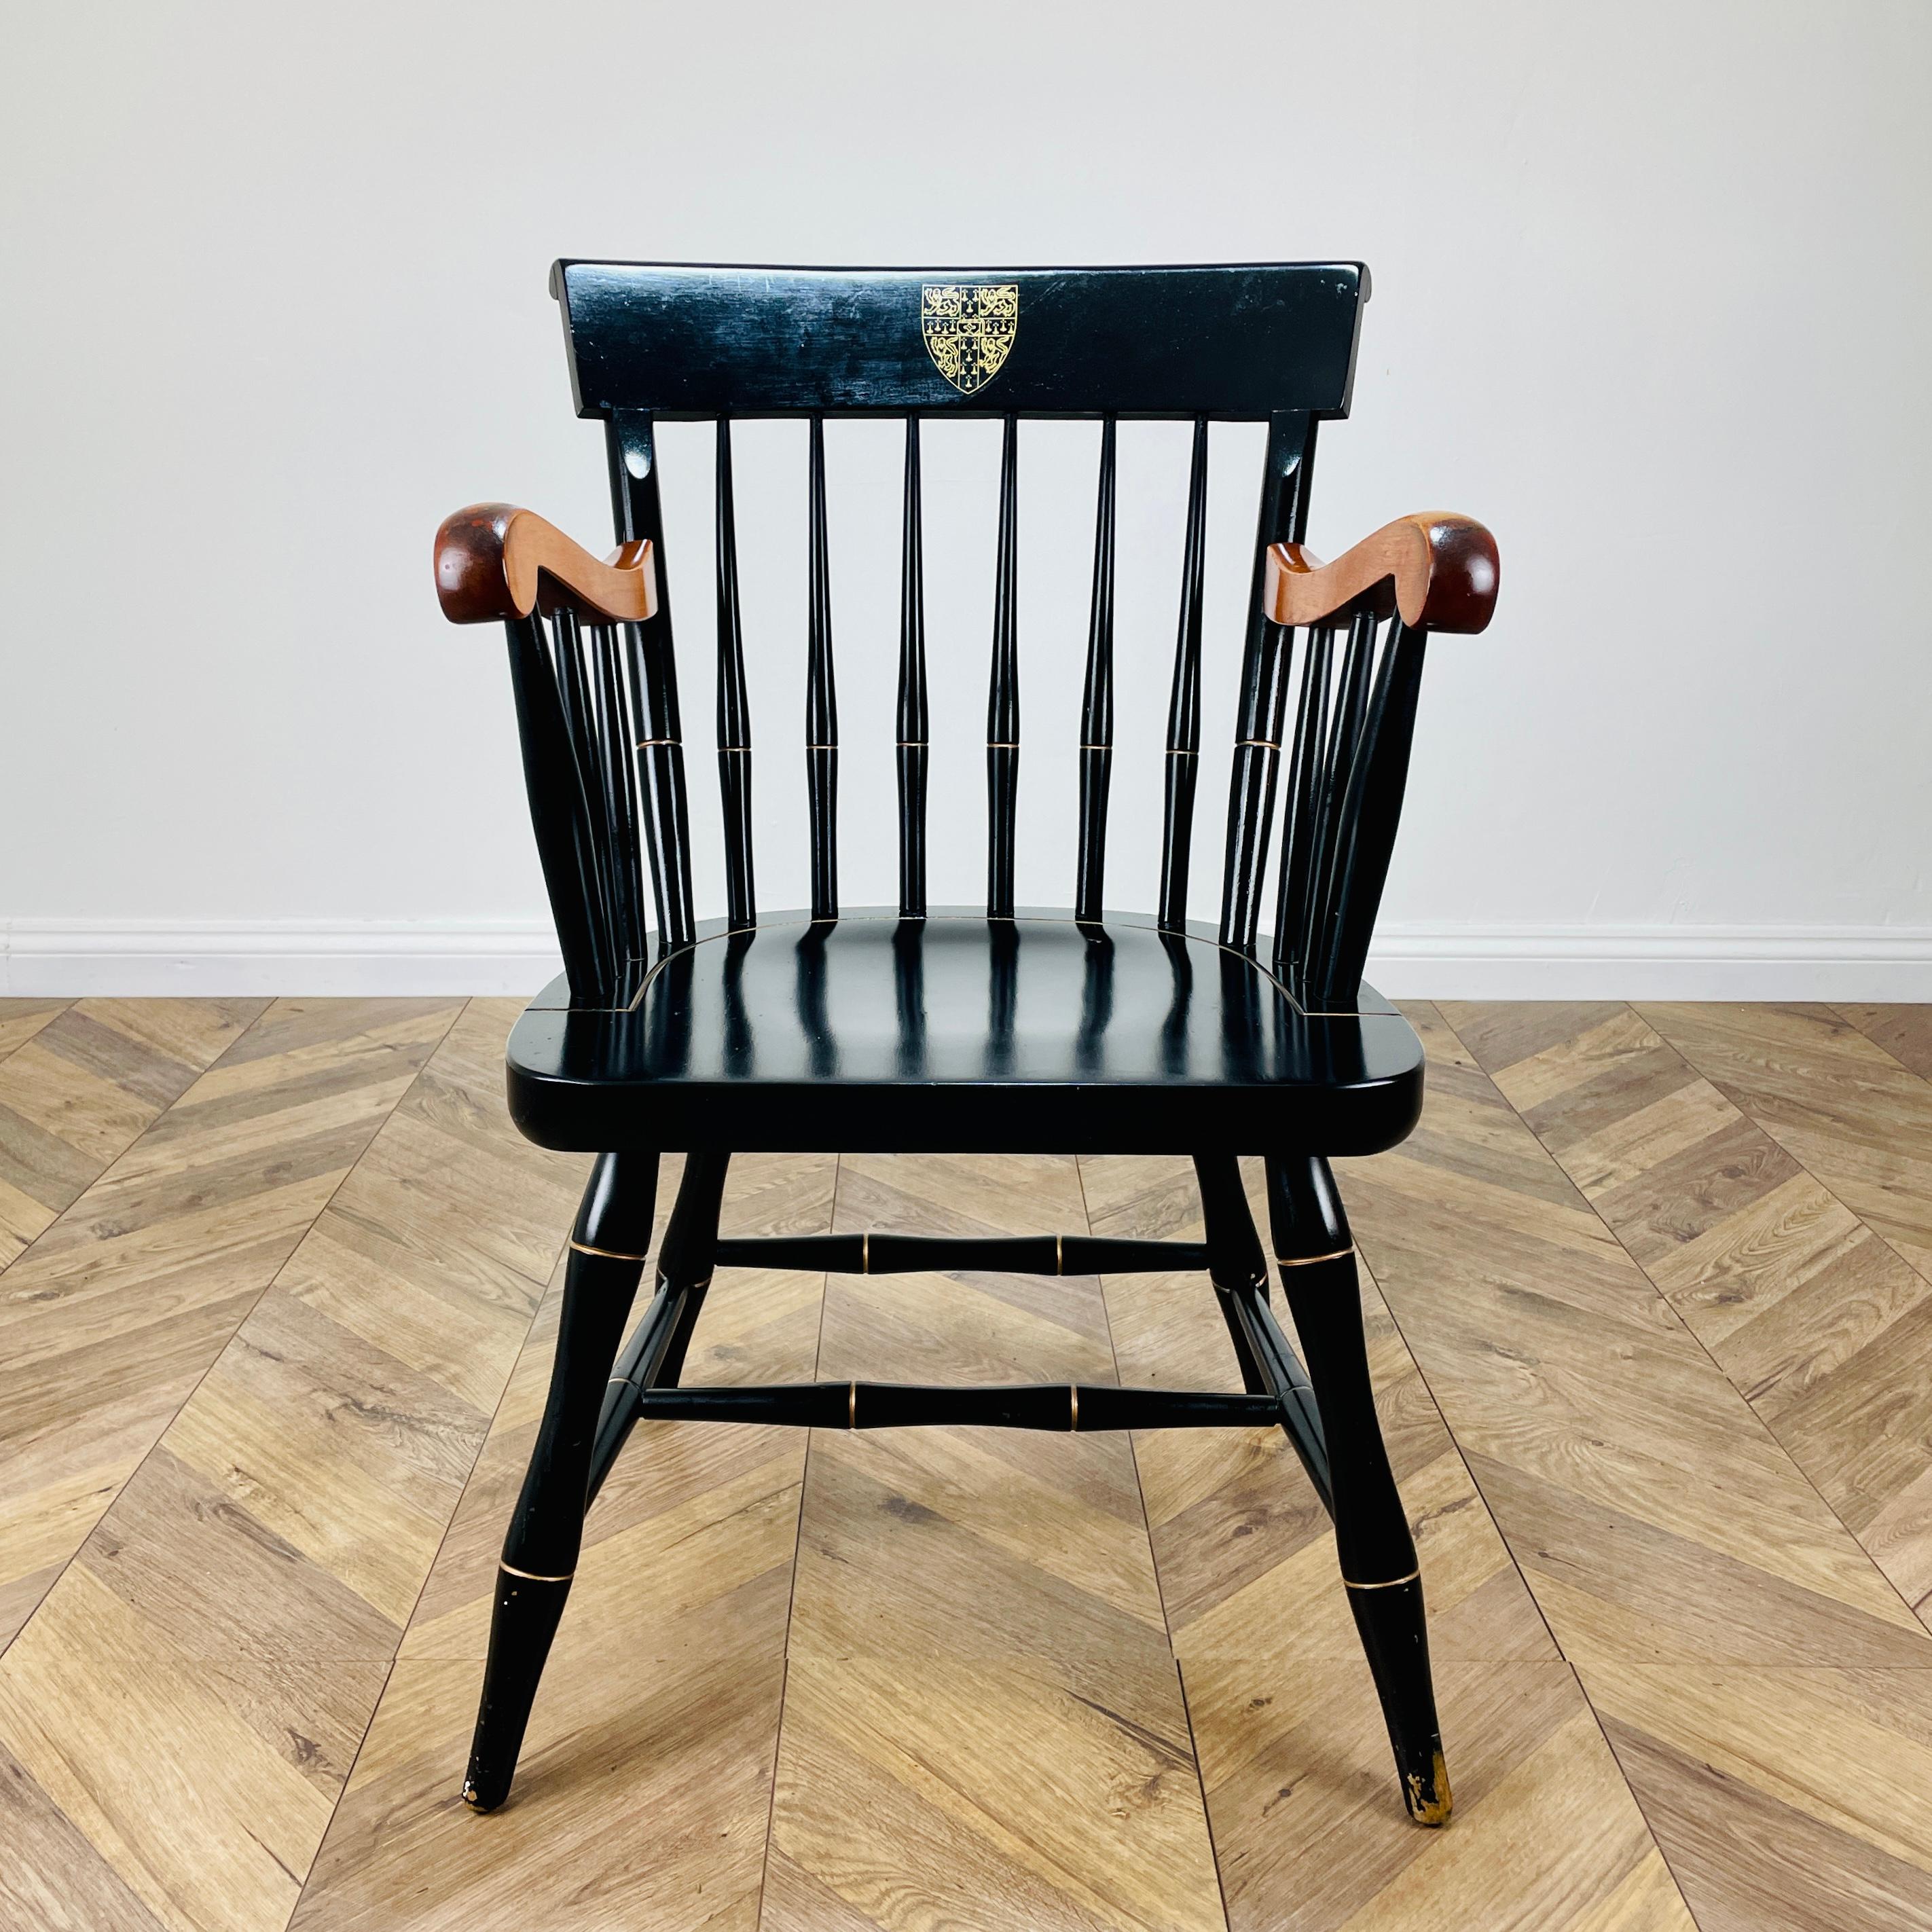 A rare black ‘Nichols & Stone’ University of Cambridge Windsor Armchair with Gold Detailing and Beautifully Worn Arms and Leg Struts, circa 1950s.

The chair is untouched, in original paint finish and traditionally only offered for sale to